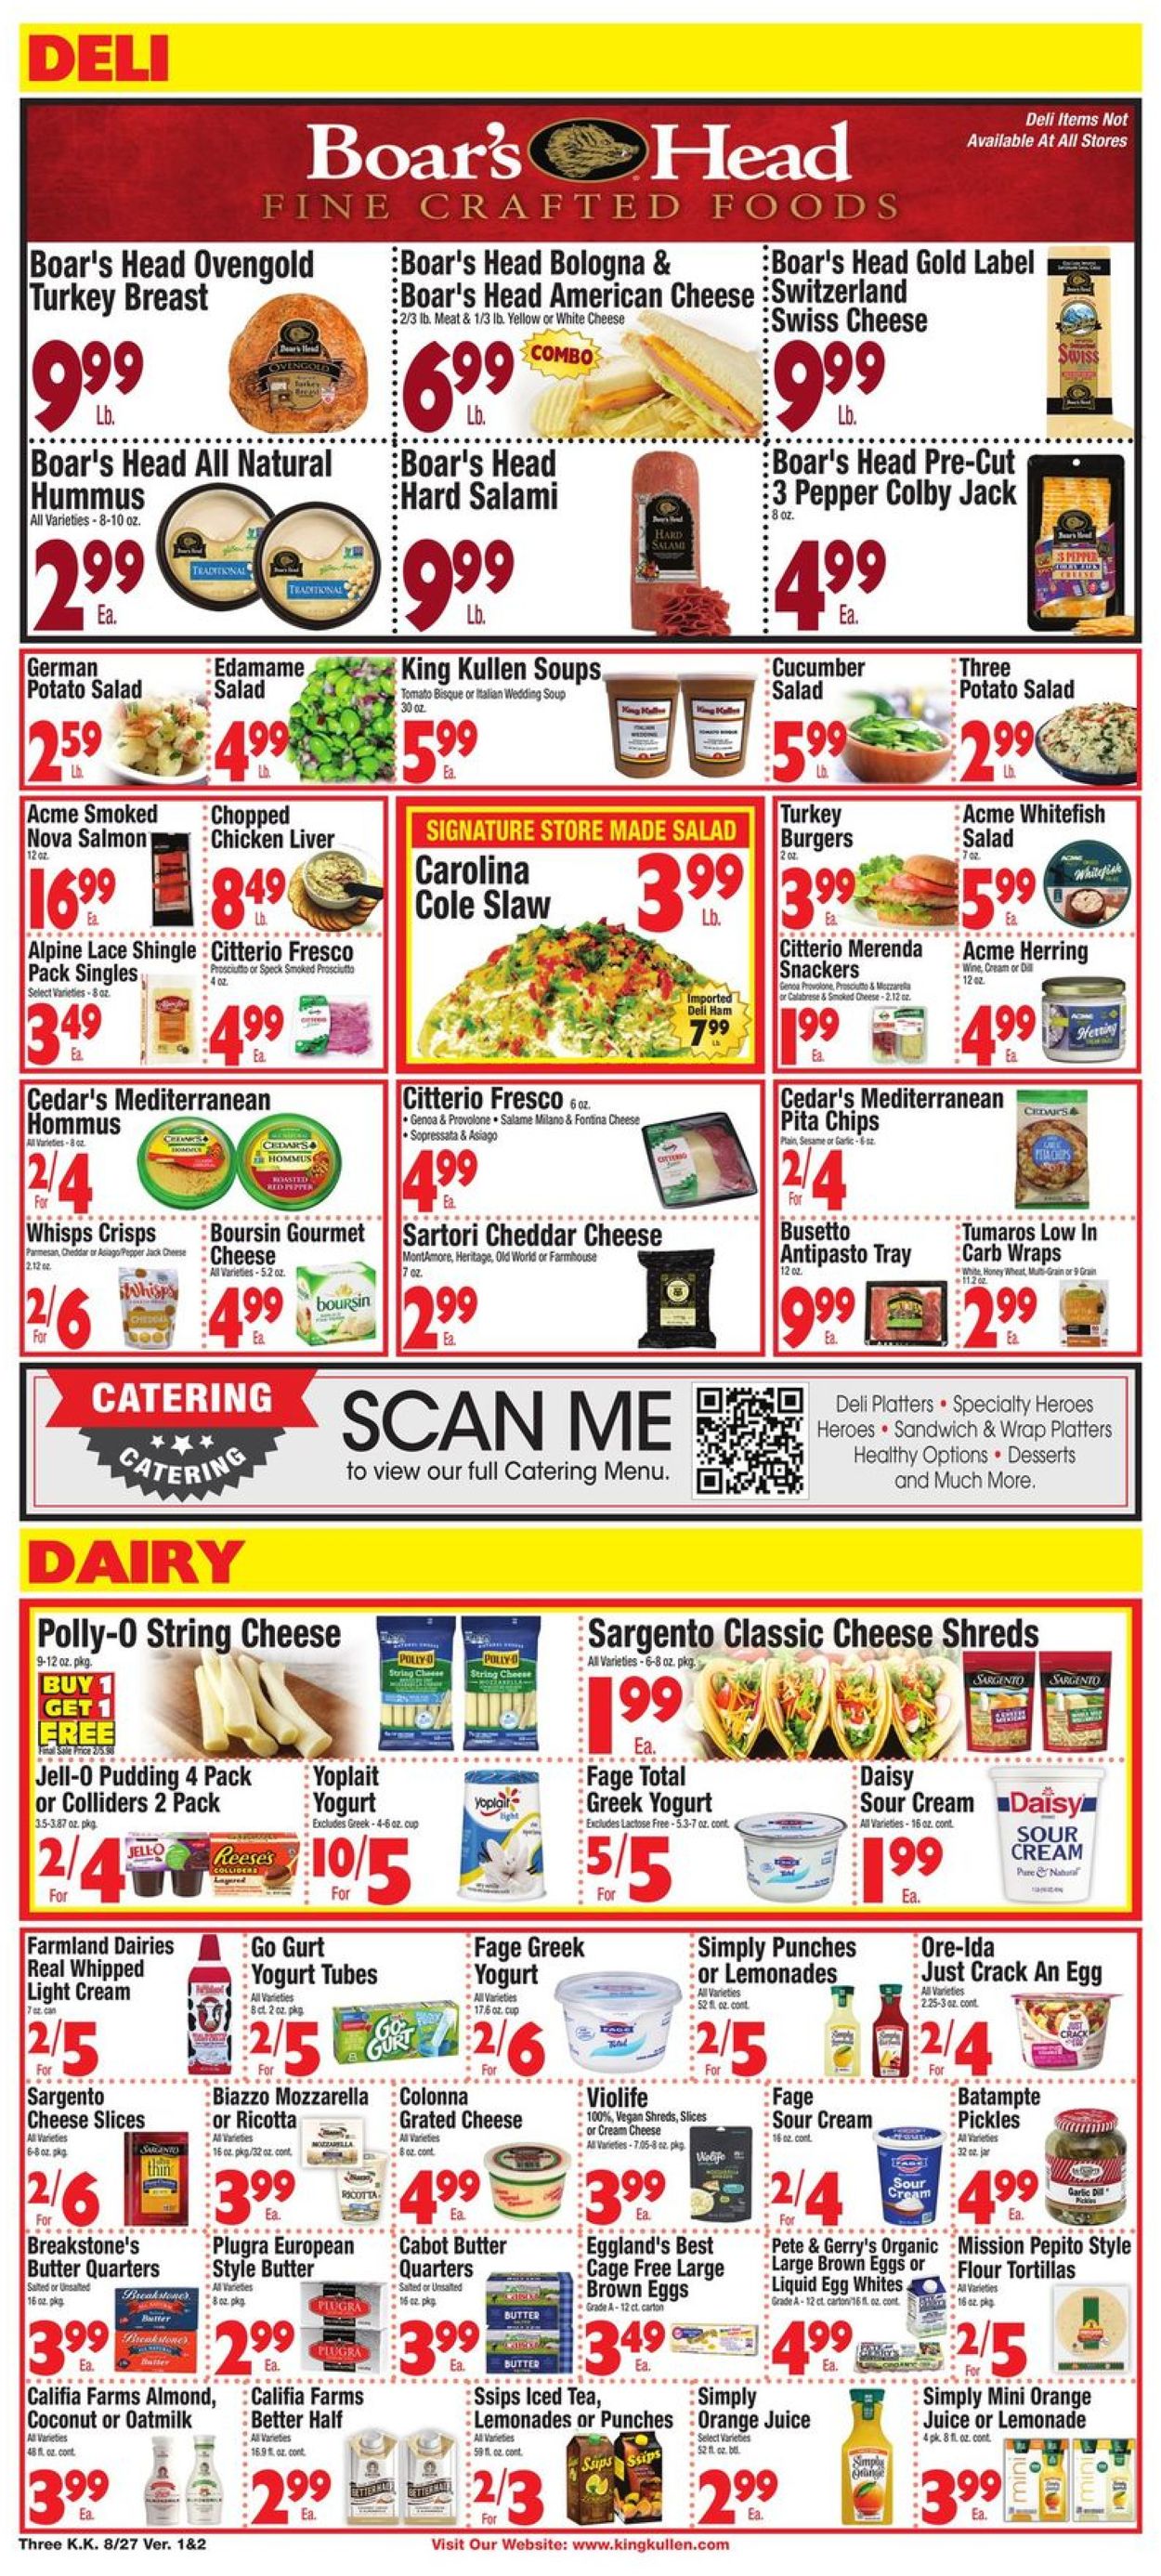 King Kullen Ad from 08/27/2021